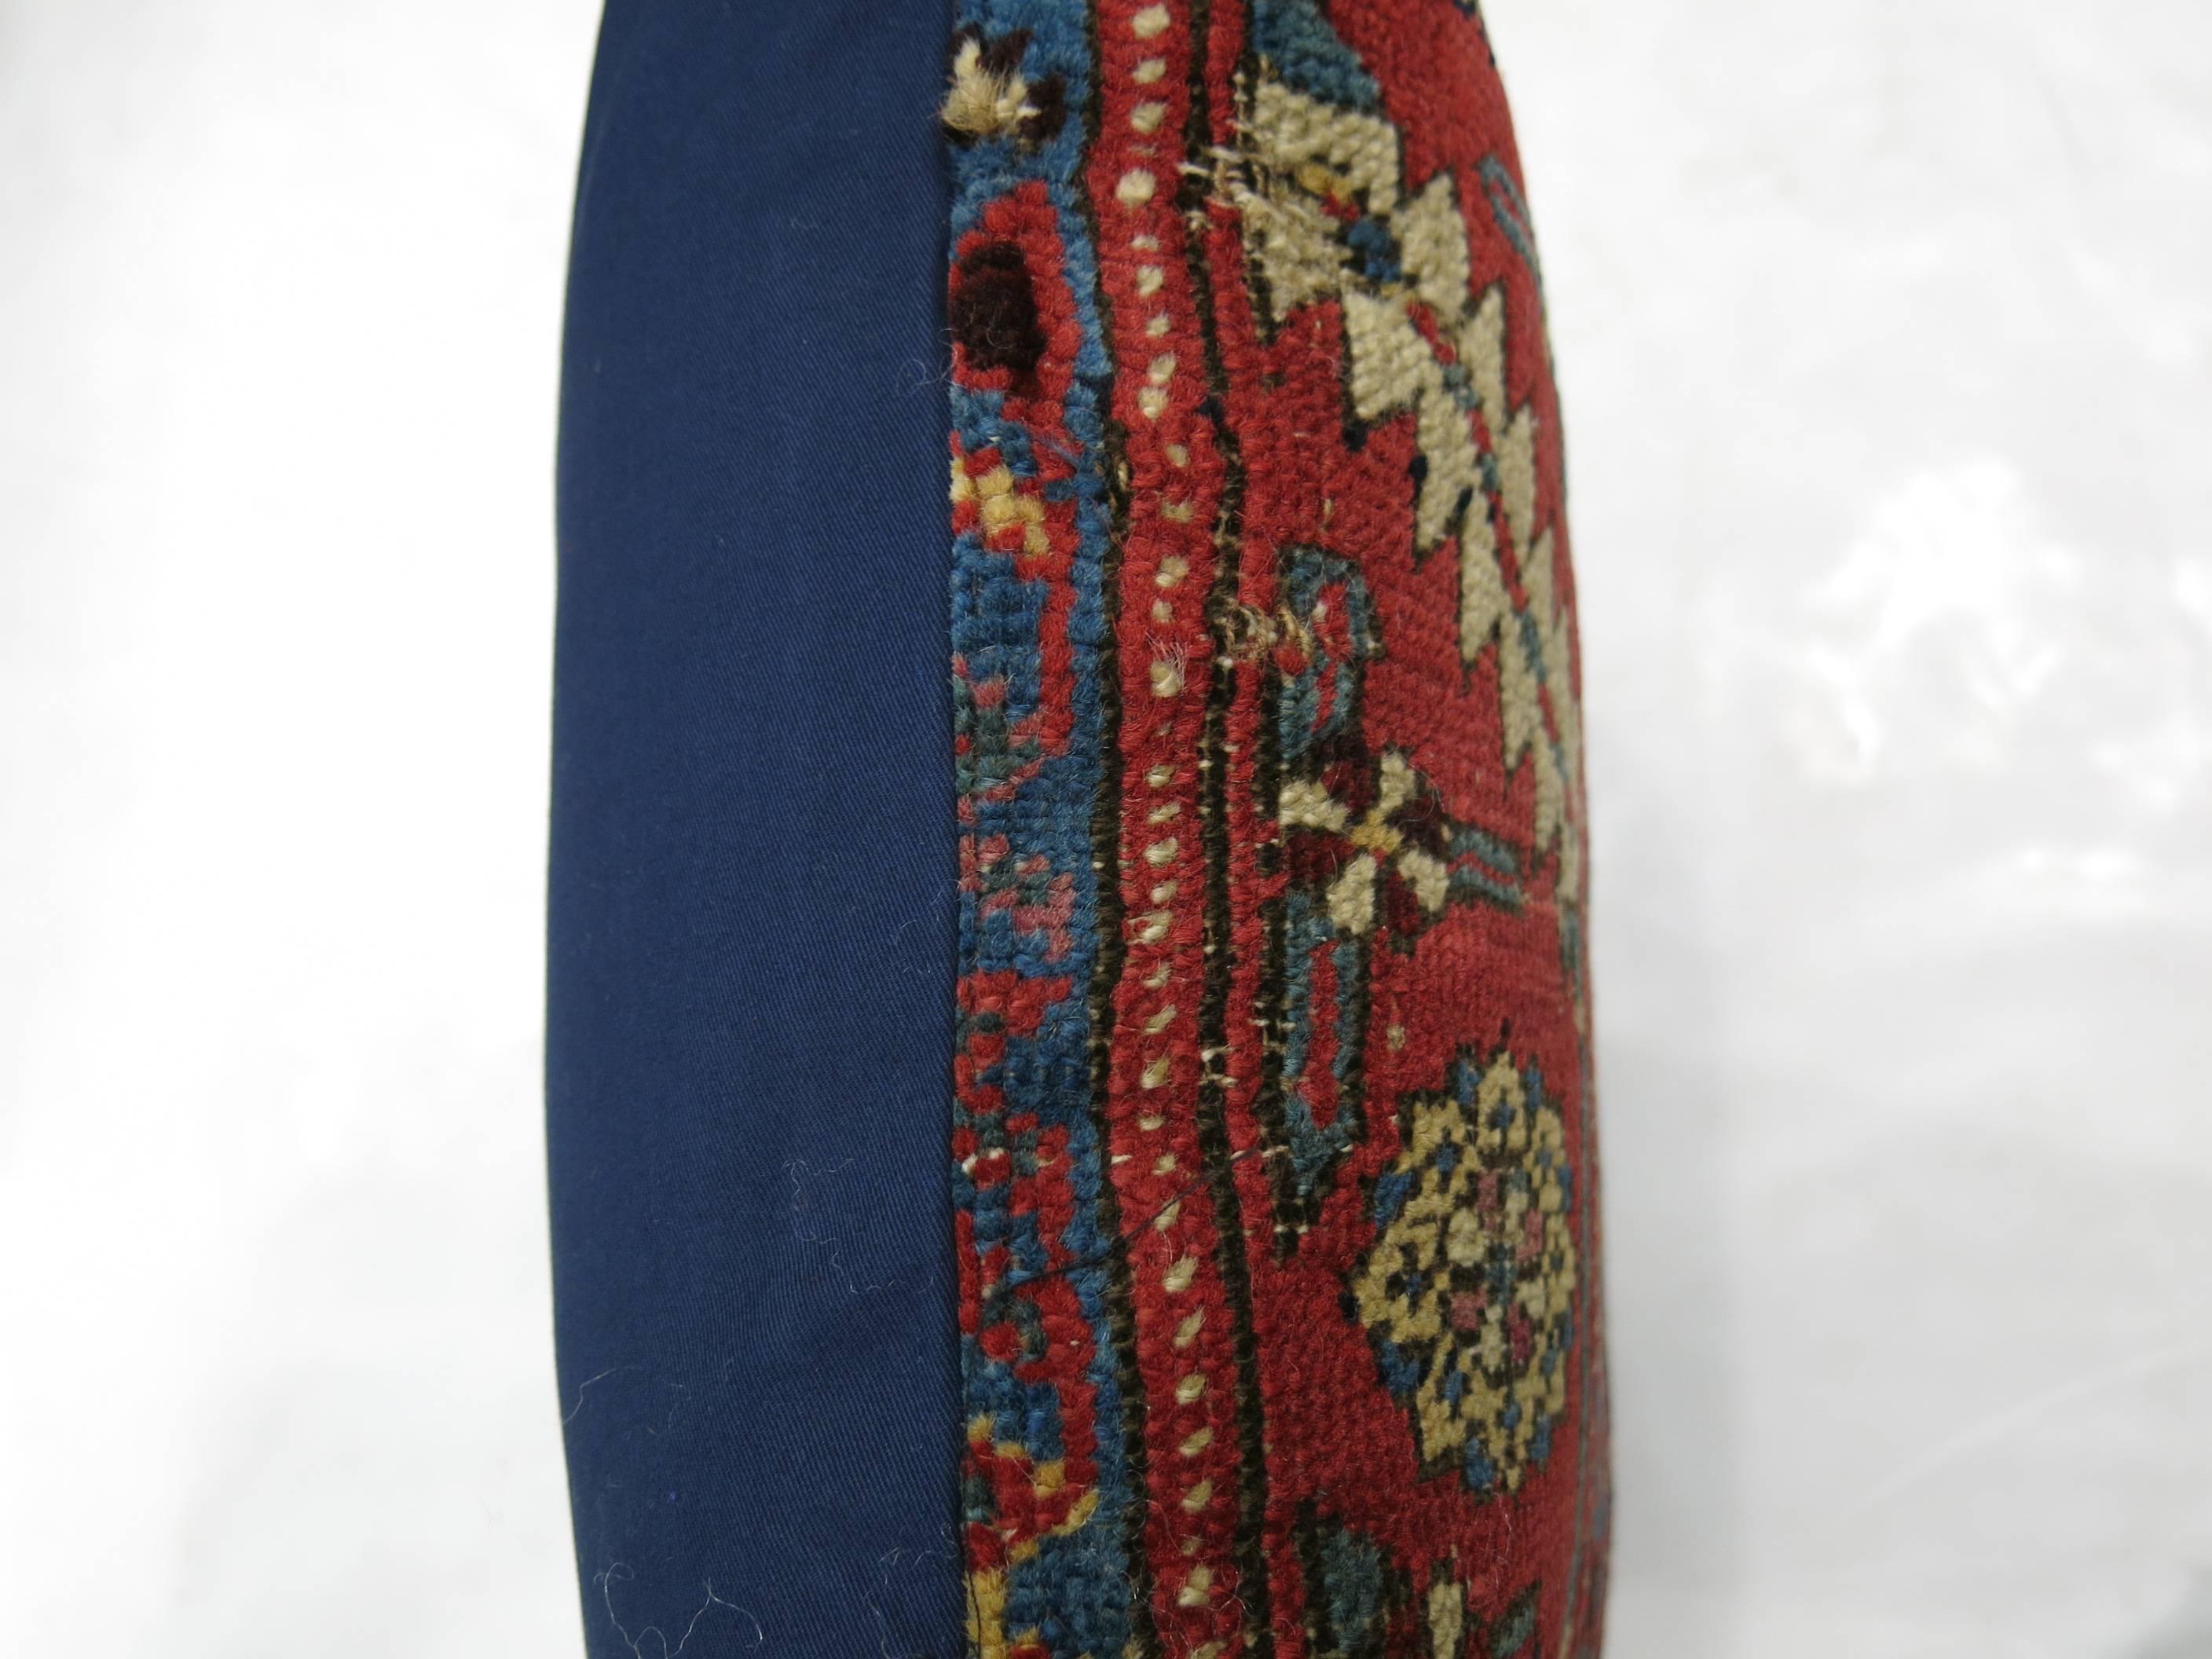 Pillow made from an antique Persian rug backed in blue.

17'' x 18''